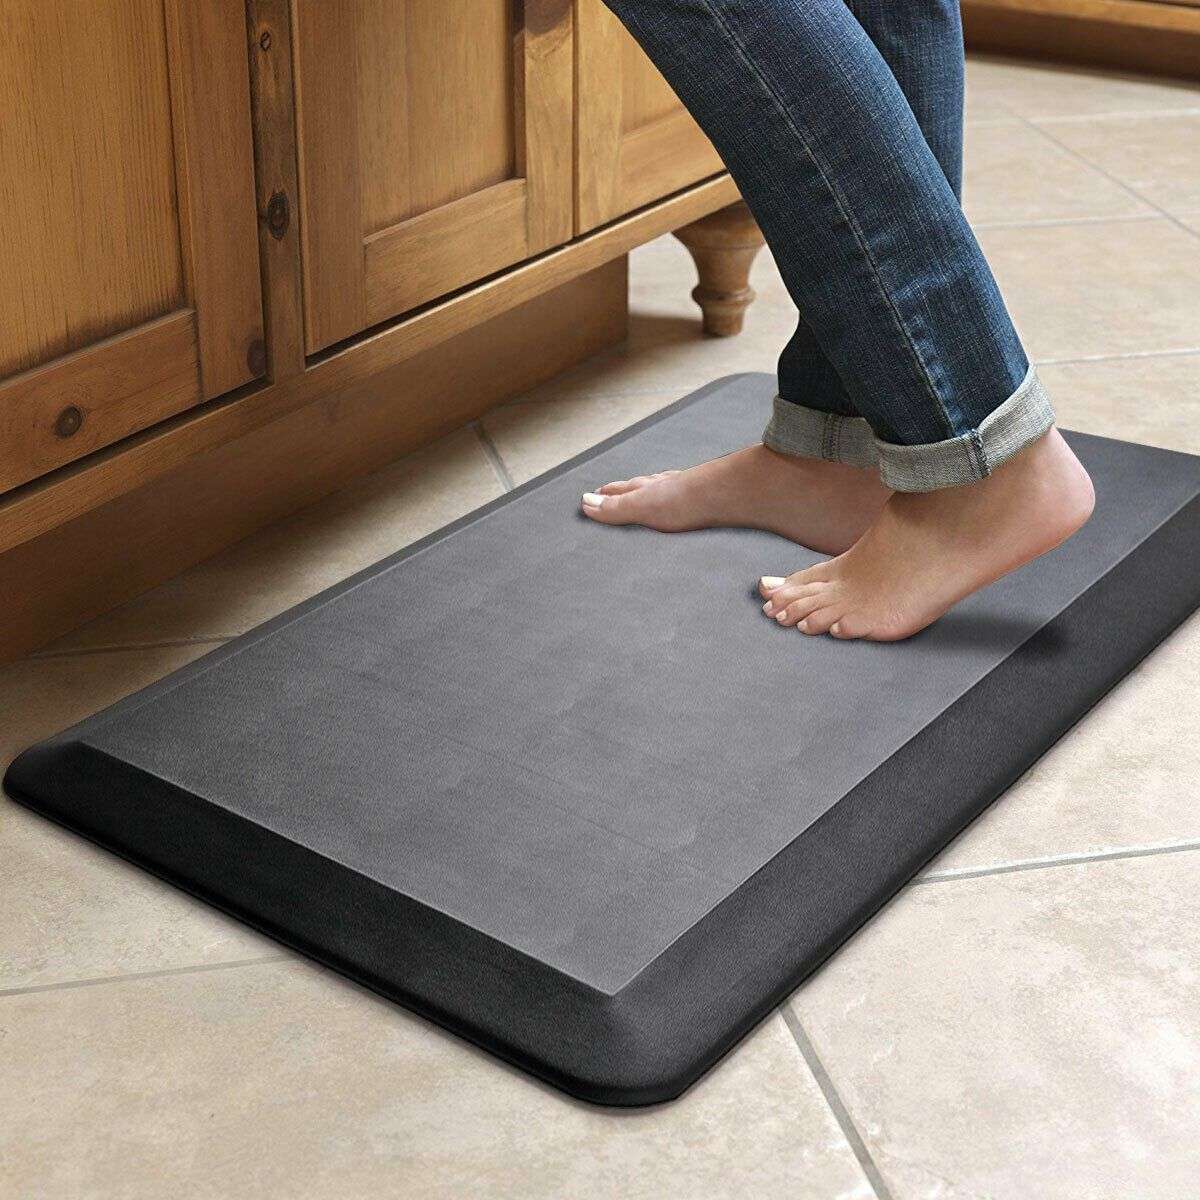 Top 5 Best Anti Fatigue Mats For Kitchen (Review) In 2020 in 2021 ...